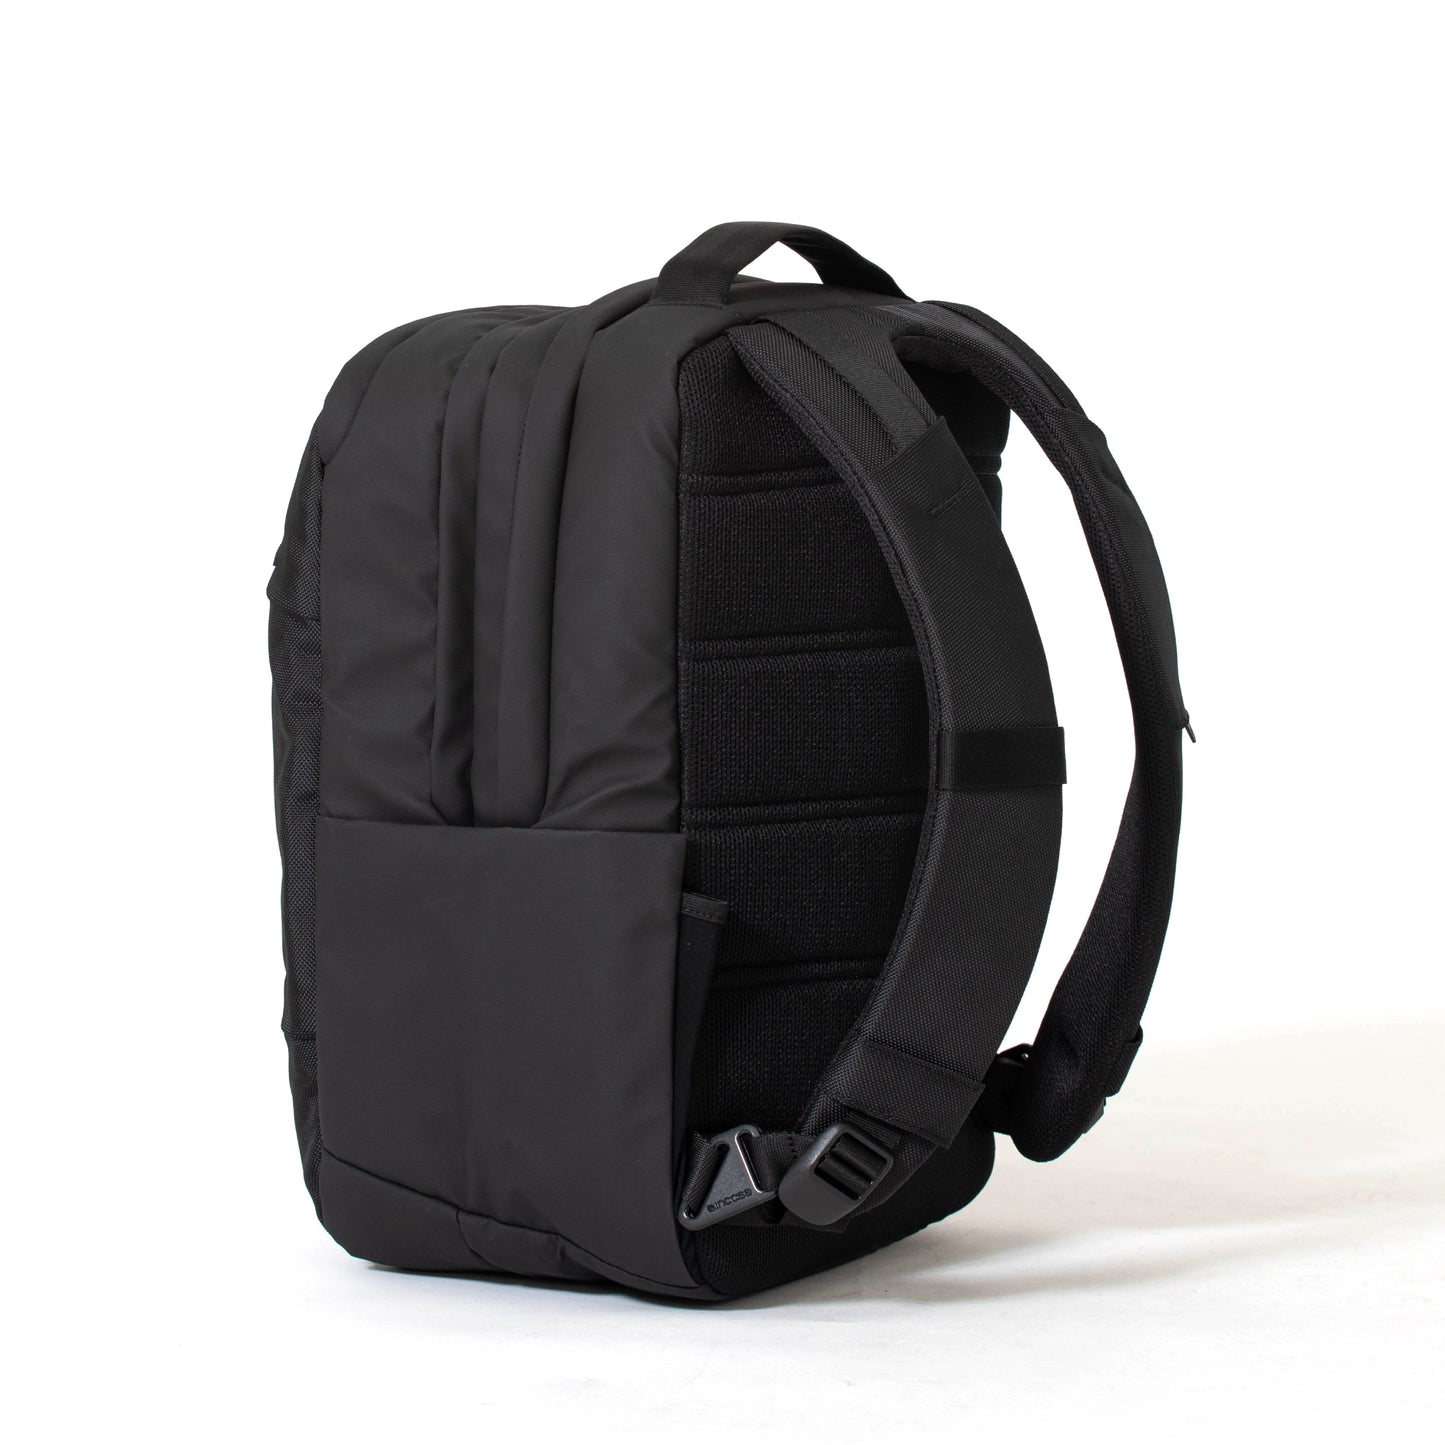 City Backpack With 1,680D -Black- （STORE LIMITED）